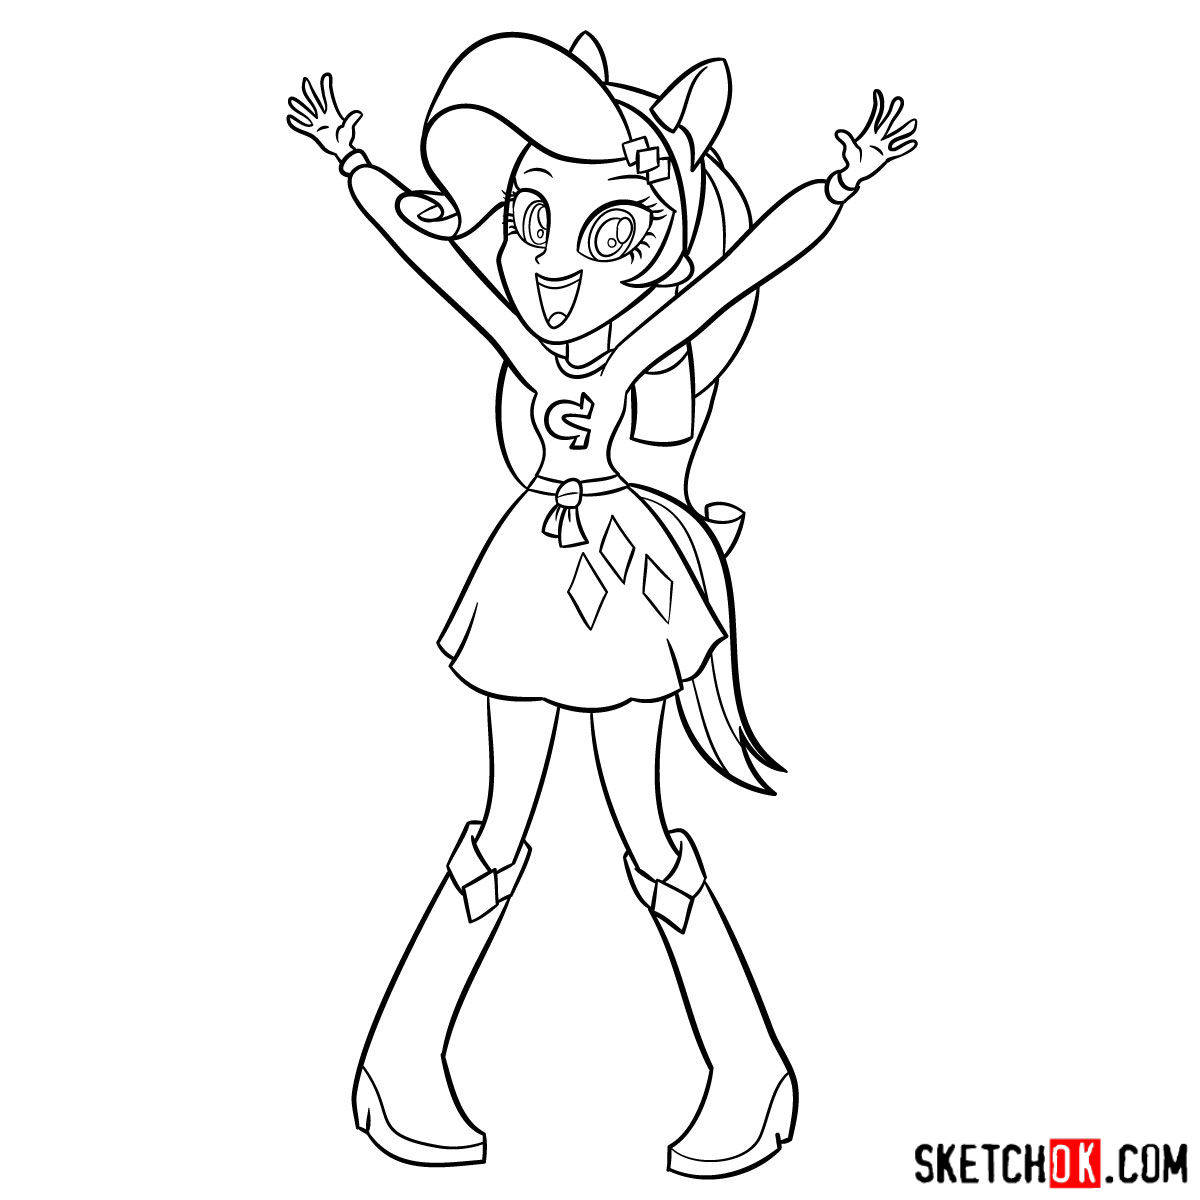 How to draw Rarity - Equestria Girls - step 16